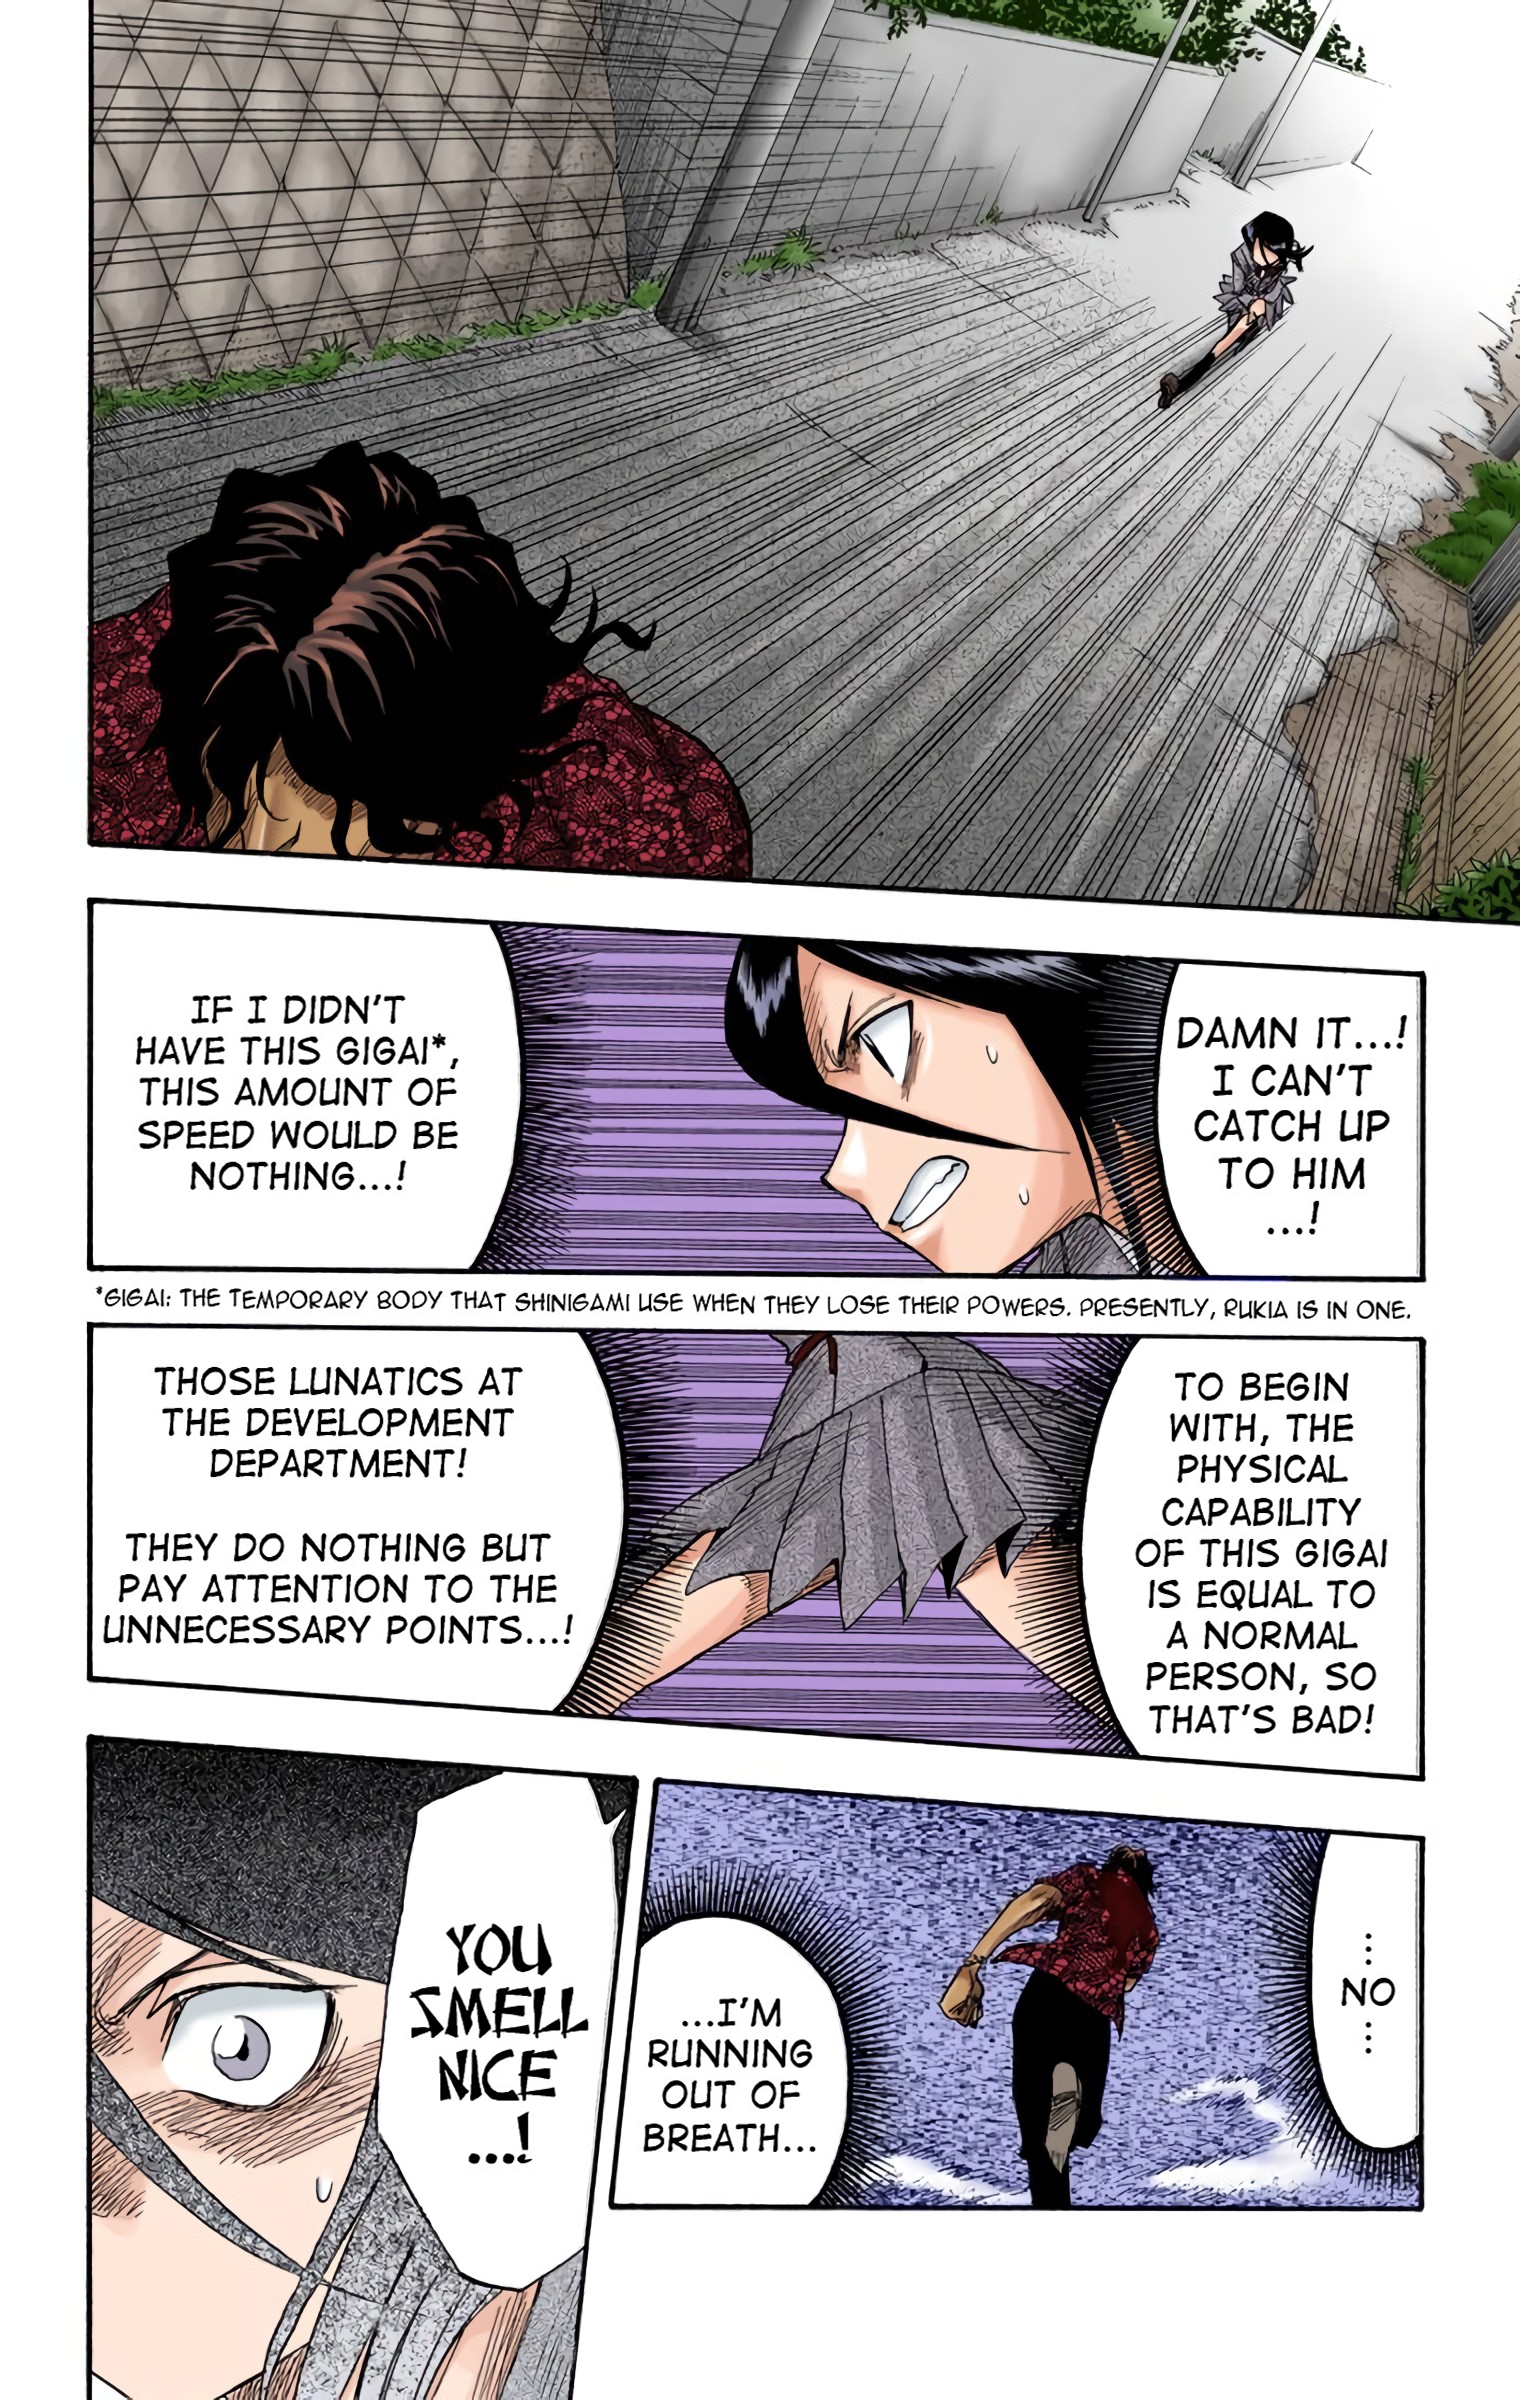 Bleach - Digital Colored Comics Vol.2 Chapter 9: Monster And A Transfer (Struck Down) - Picture 2